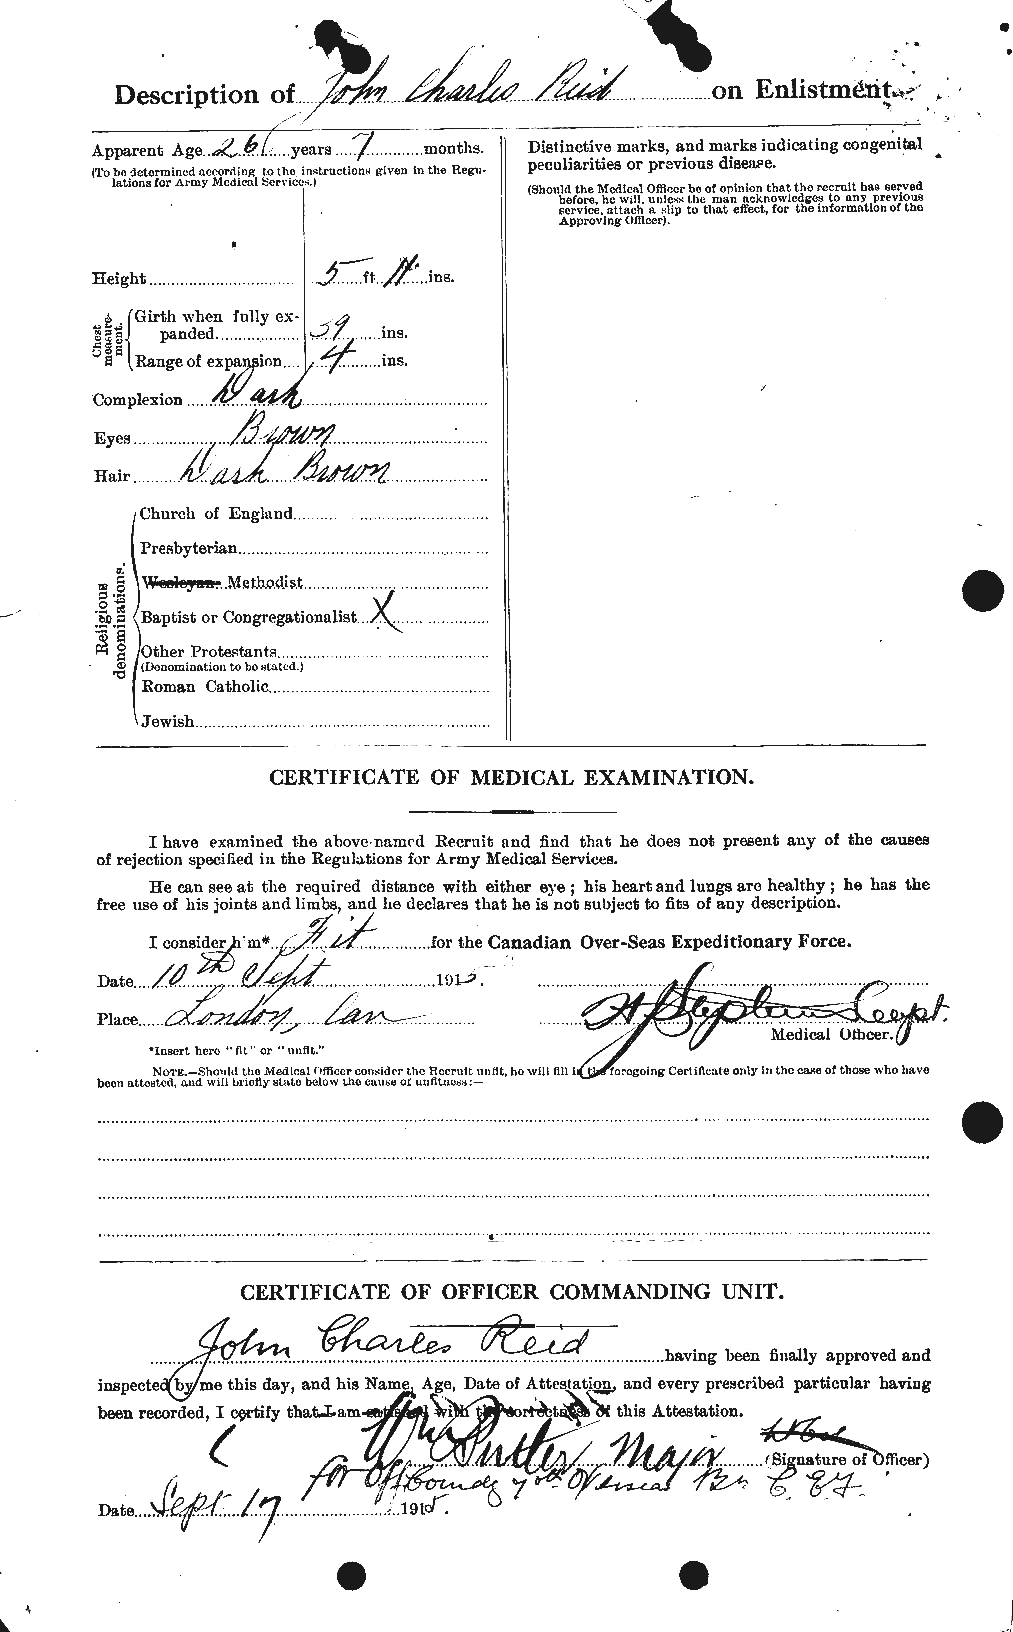 Personnel Records of the First World War - CEF 598824b